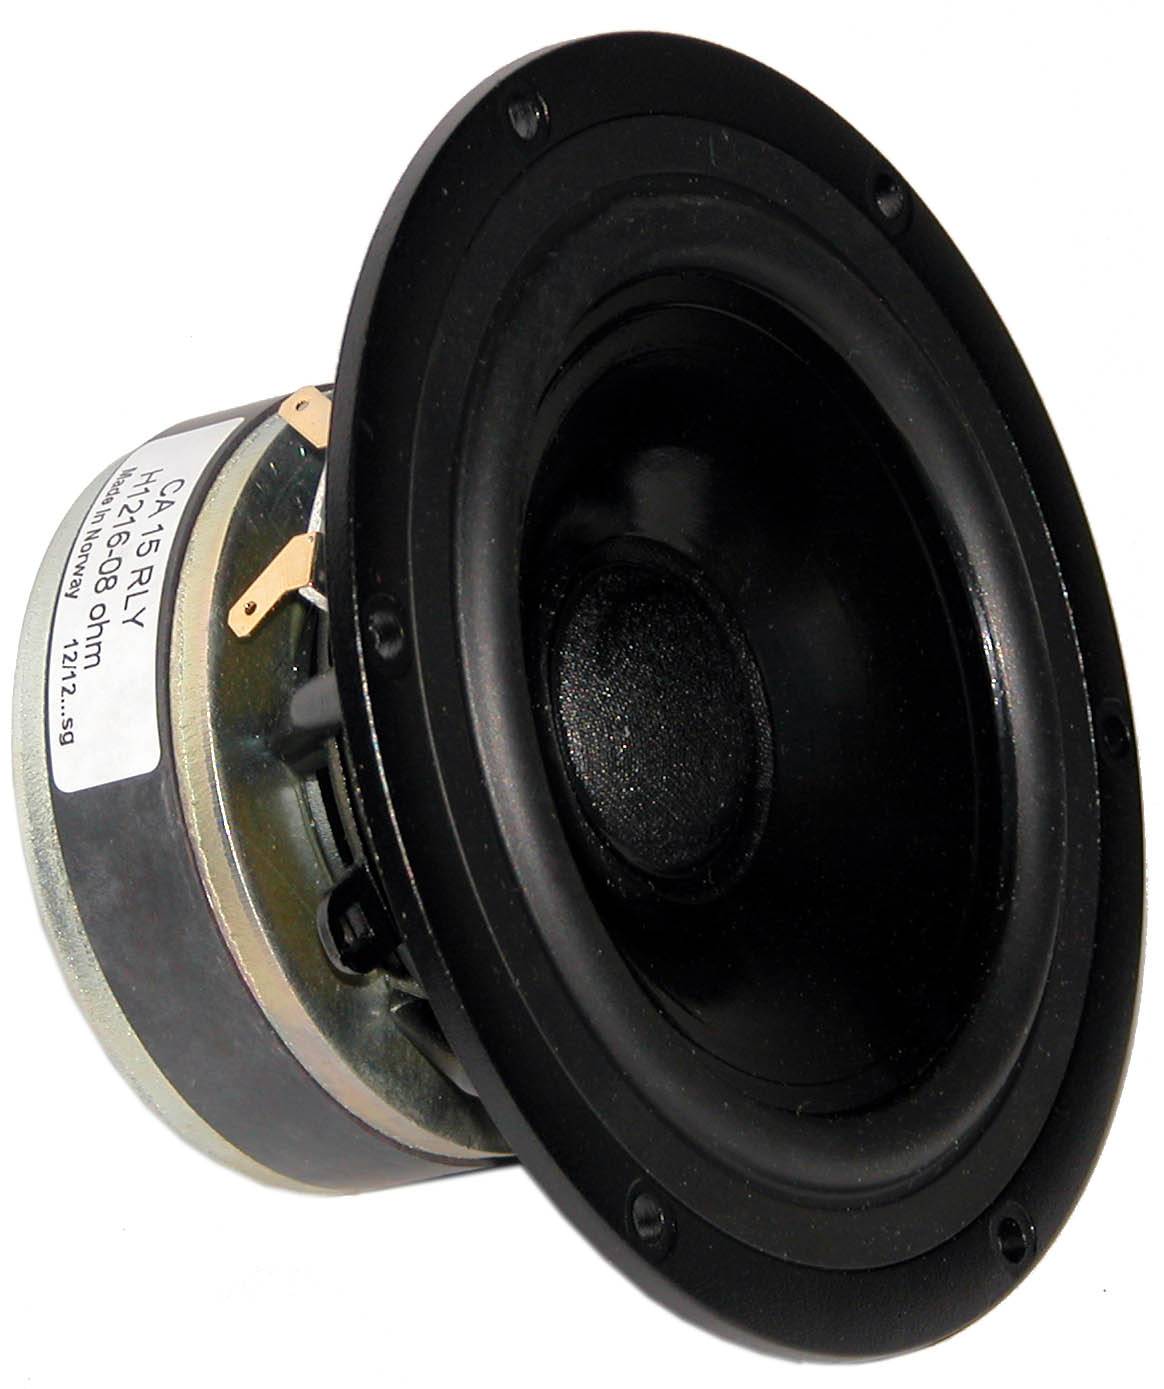 seas-ca15rly-mid-woofer-5-mm-8-ohm-250-wmax